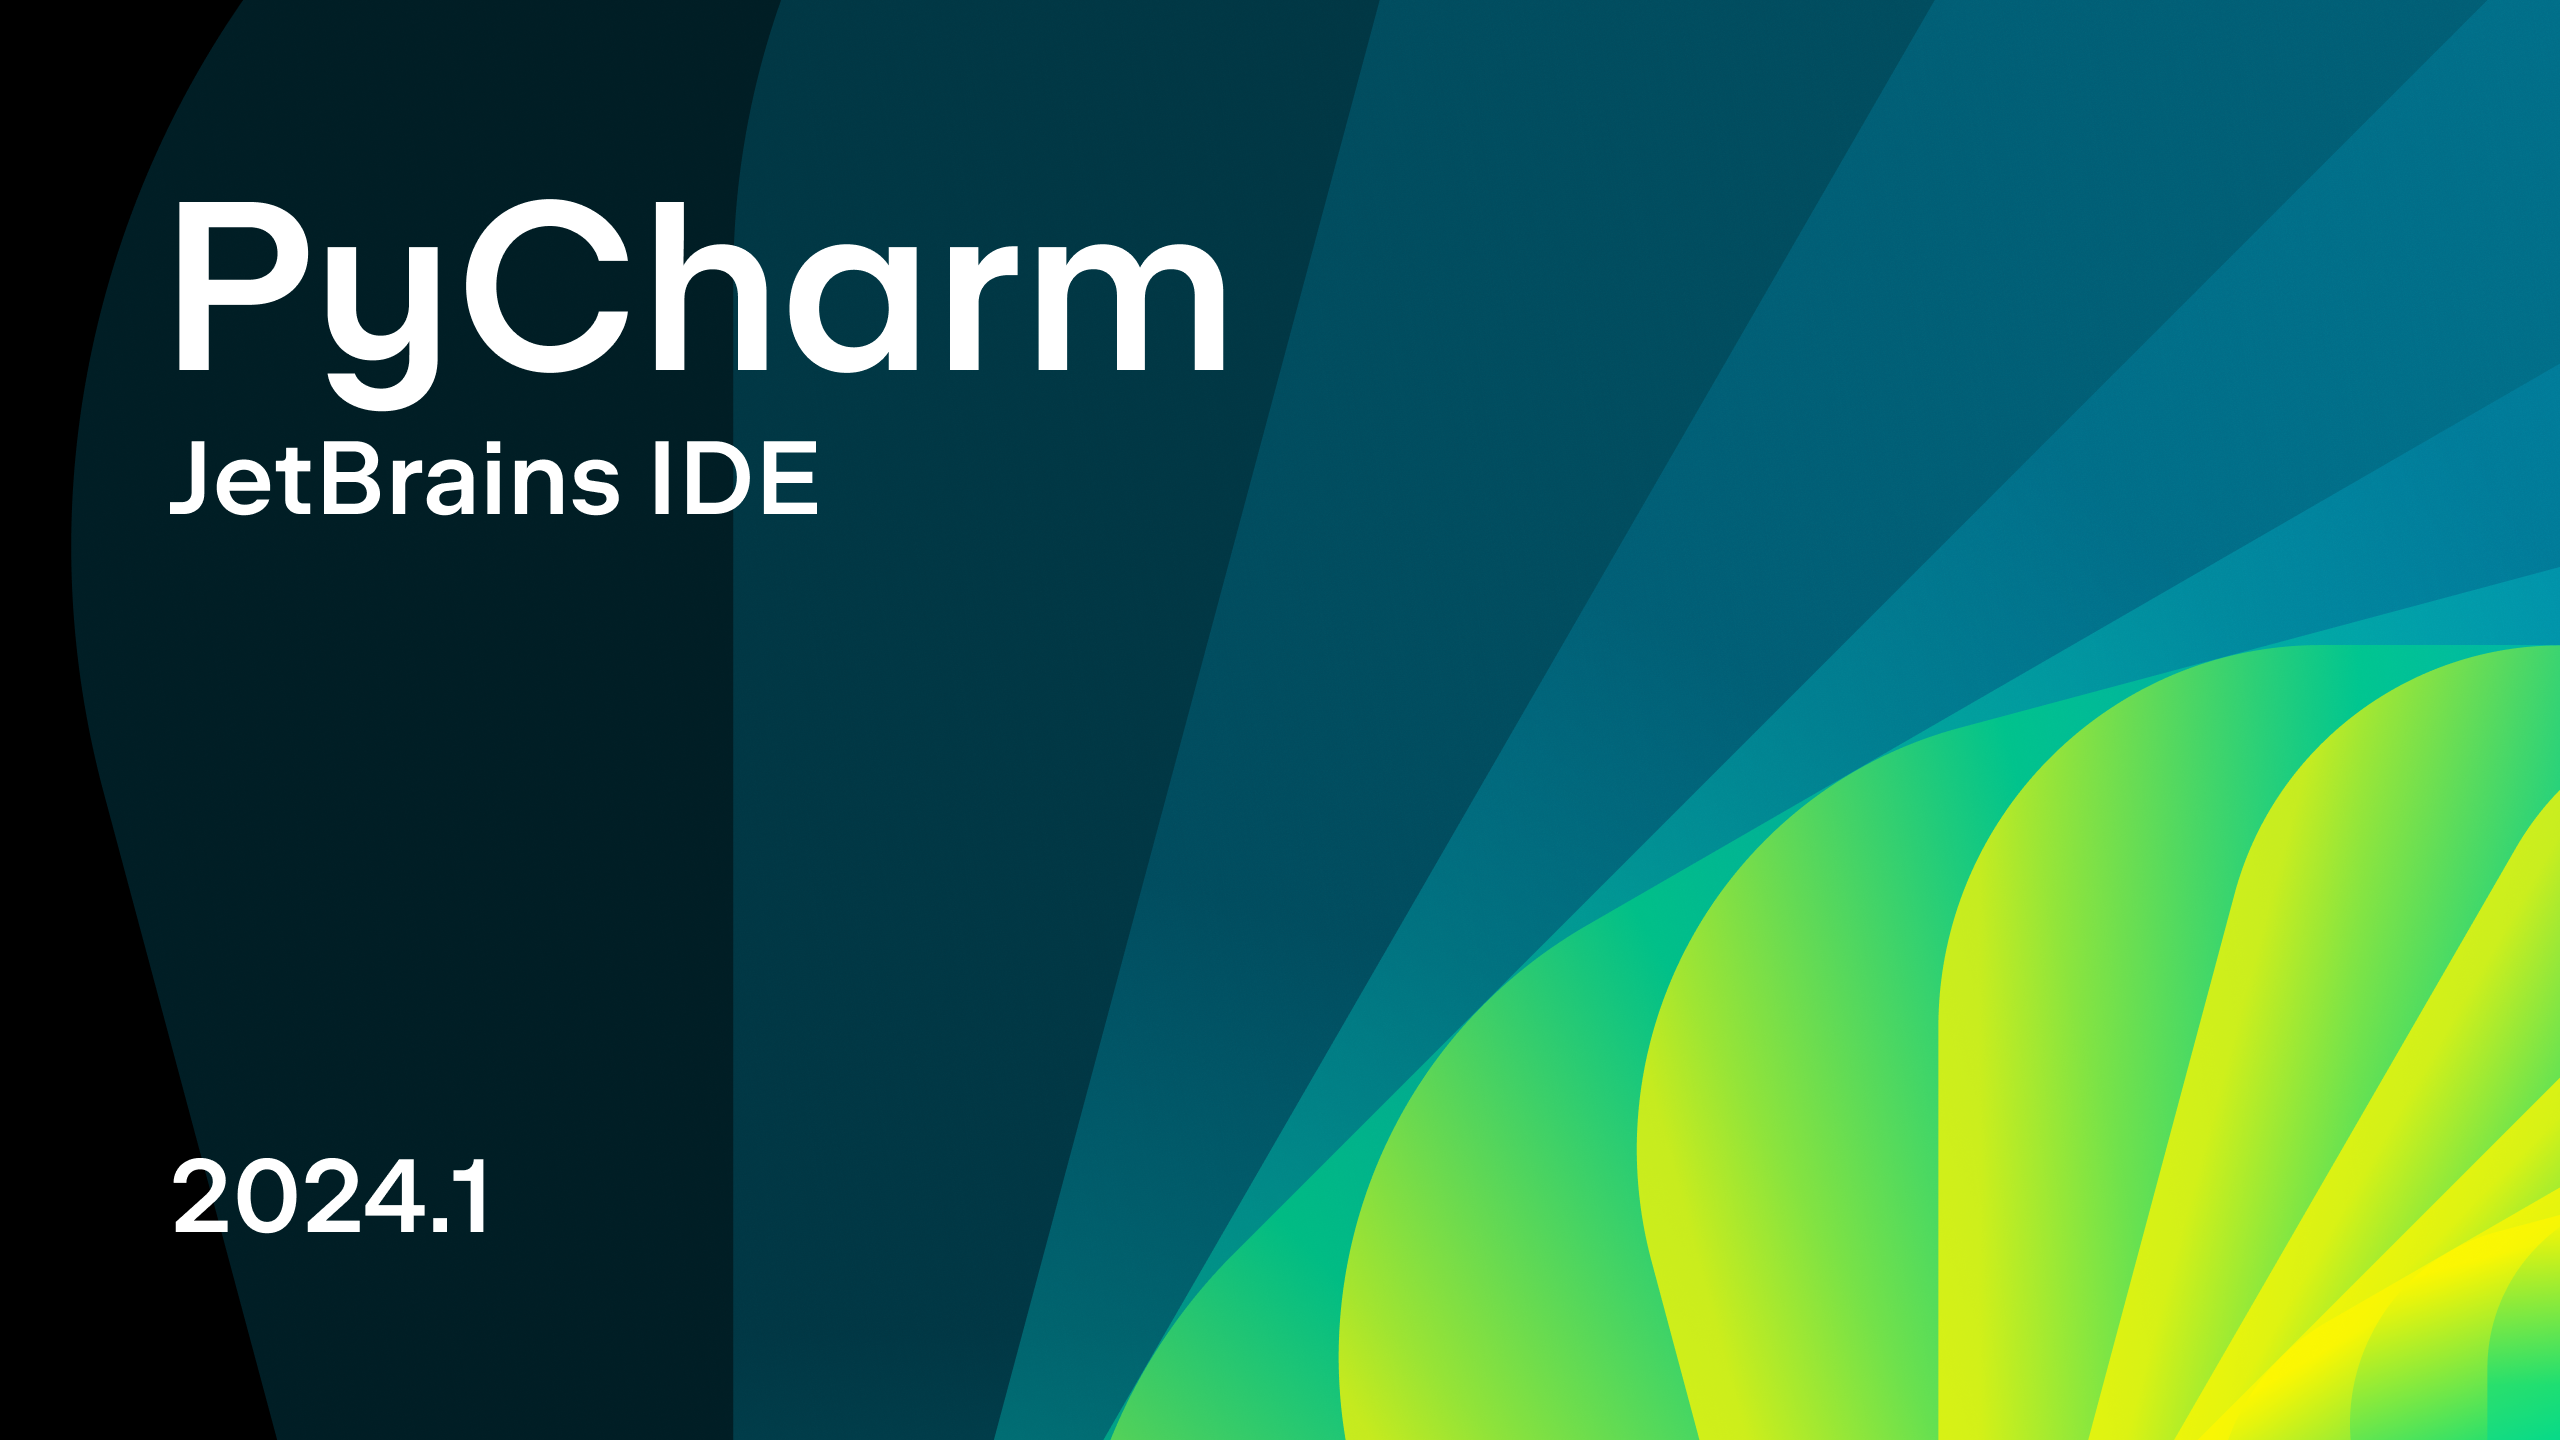 PyCharm 2024.1 Is Here! Hugging Face Model Card Previews, Local Full
Line Code Completion Updates, and more!